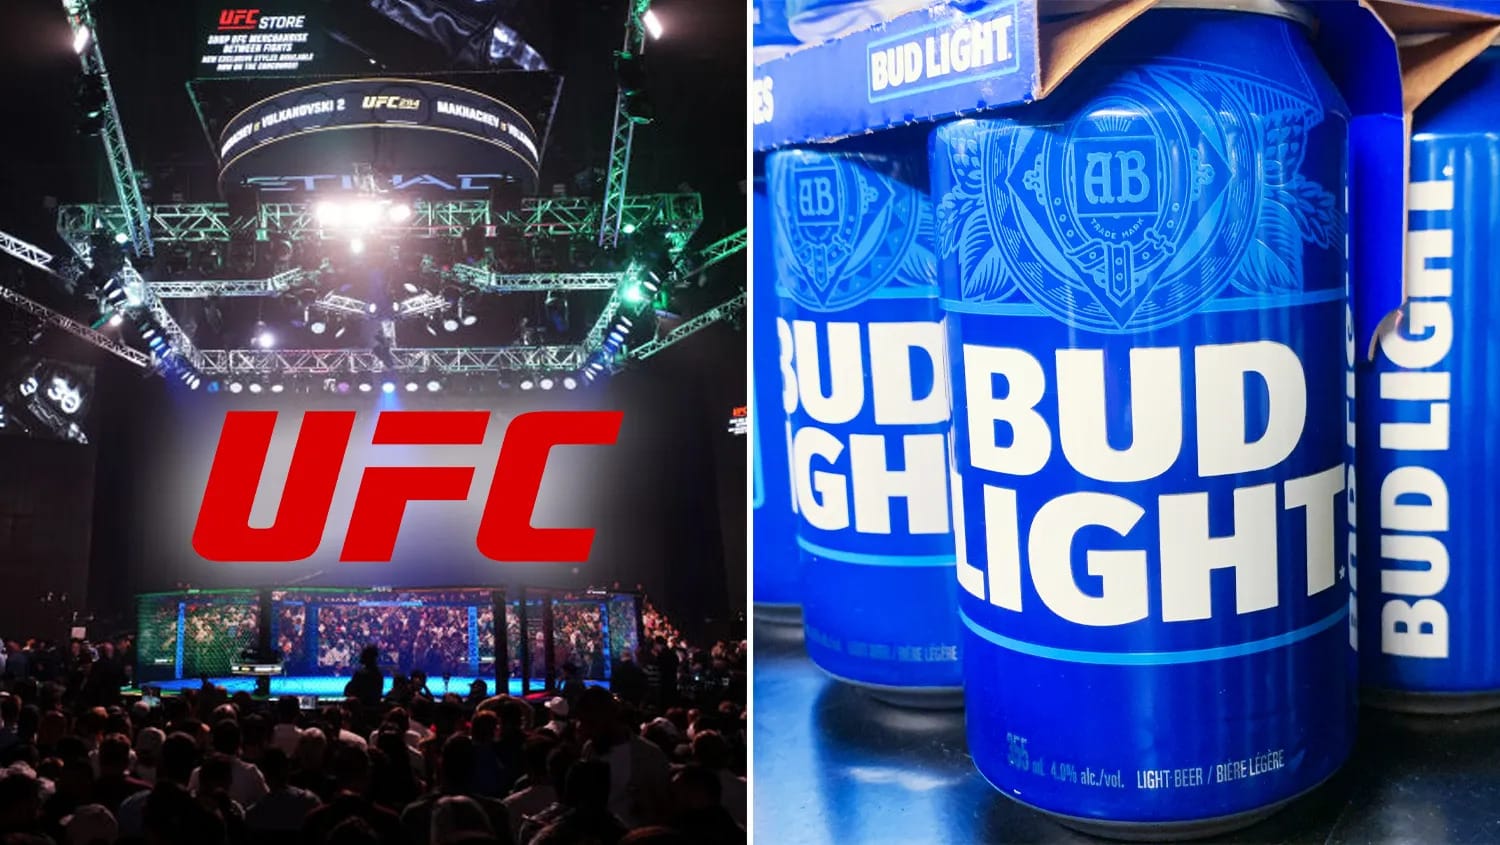 Bud Light Secures Historic UFC Sponsorship Amidst Mixed Reactions